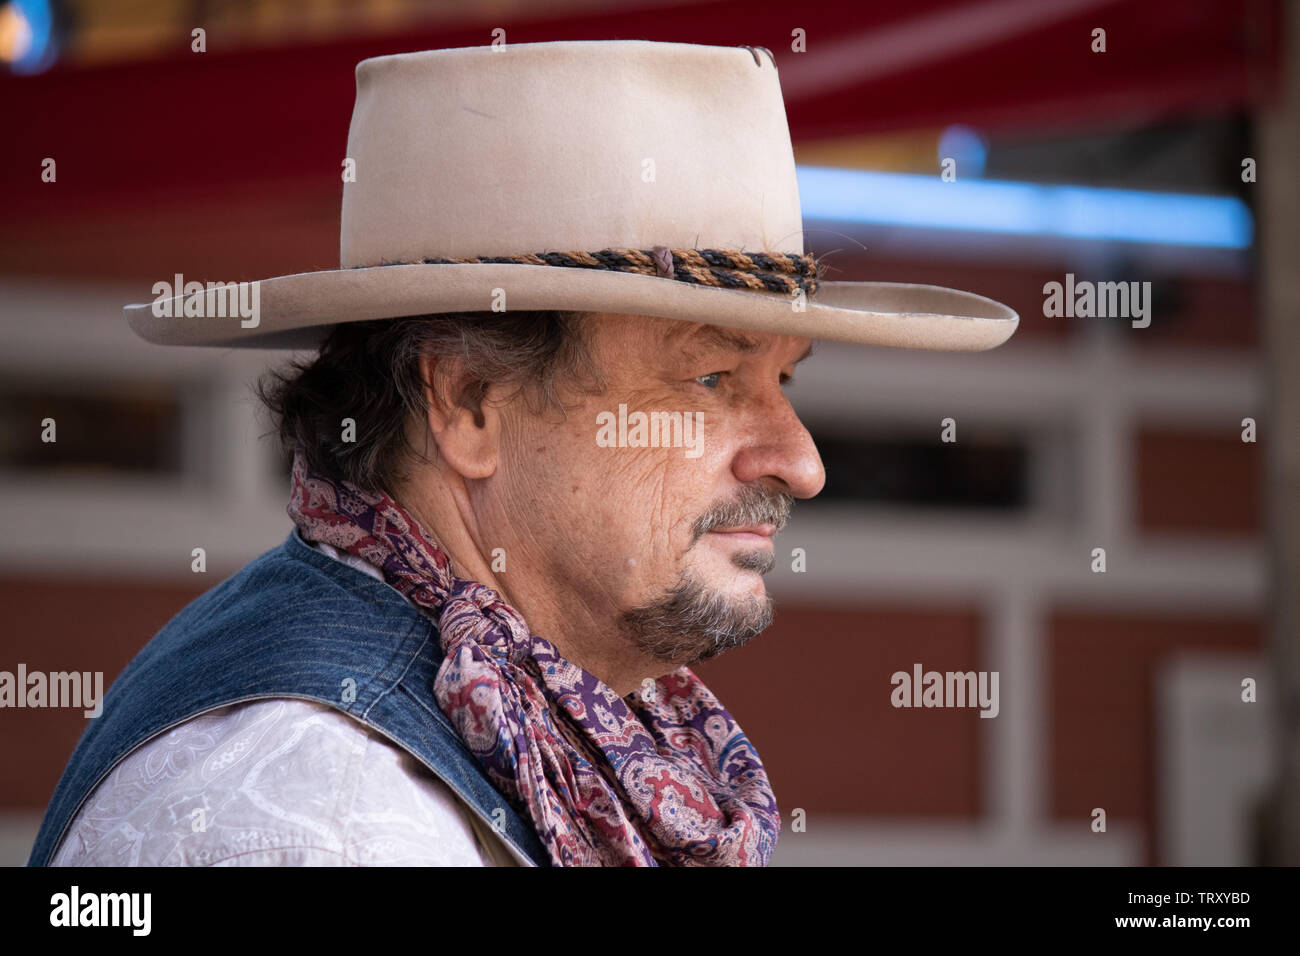 Colourful characters at the Fort Worth Stockyards living museum, Texas, USA. Stock Photo